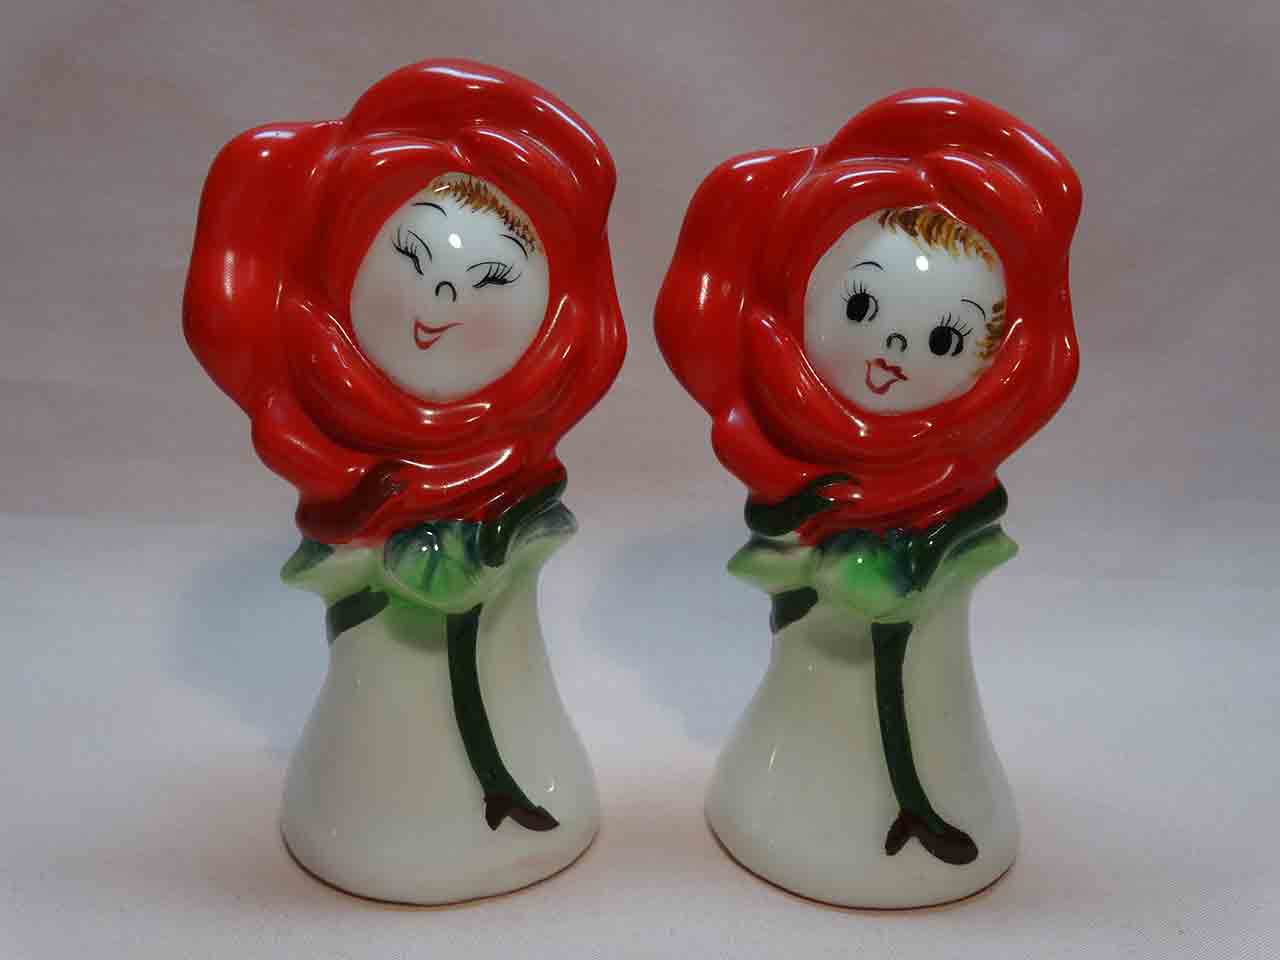 Stick Figures PY poppies flowers anthropomorphic salt and pepper shakers